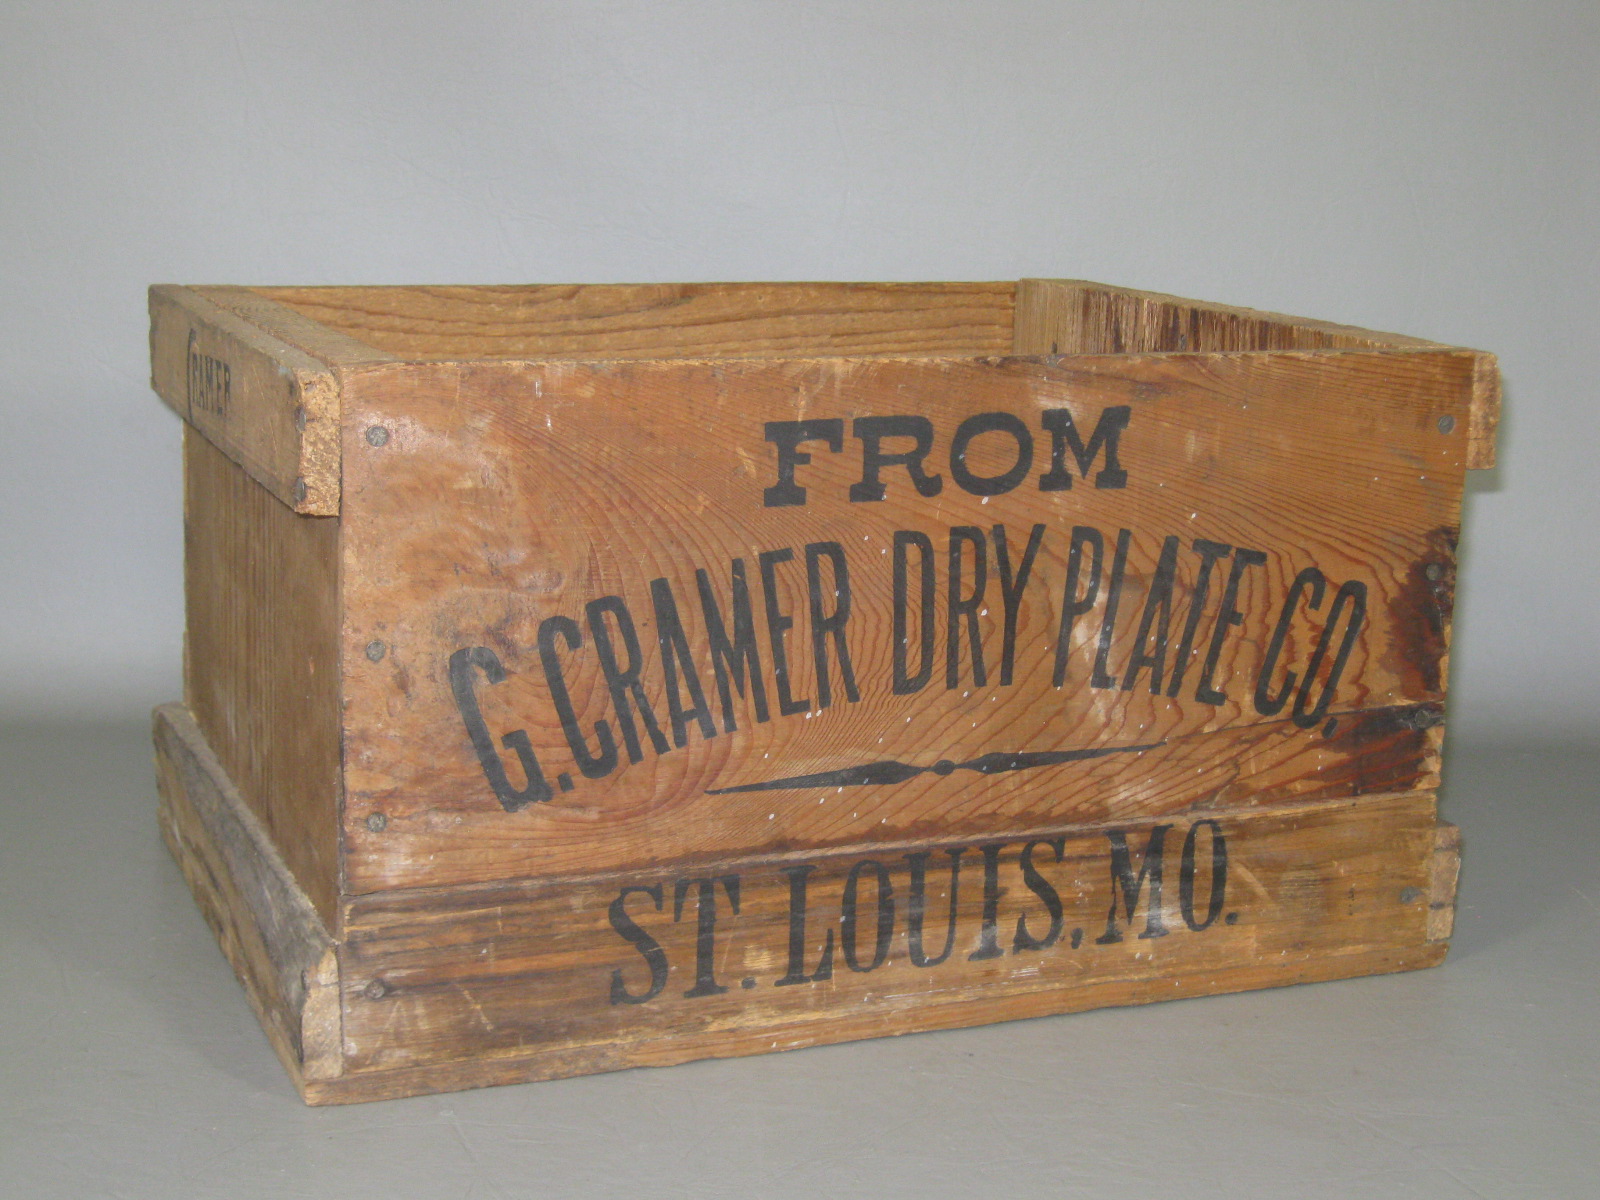 Antique 1800s Cramer Dry Plate Photo Negatives Wood Wooden Crate Box St. Louis